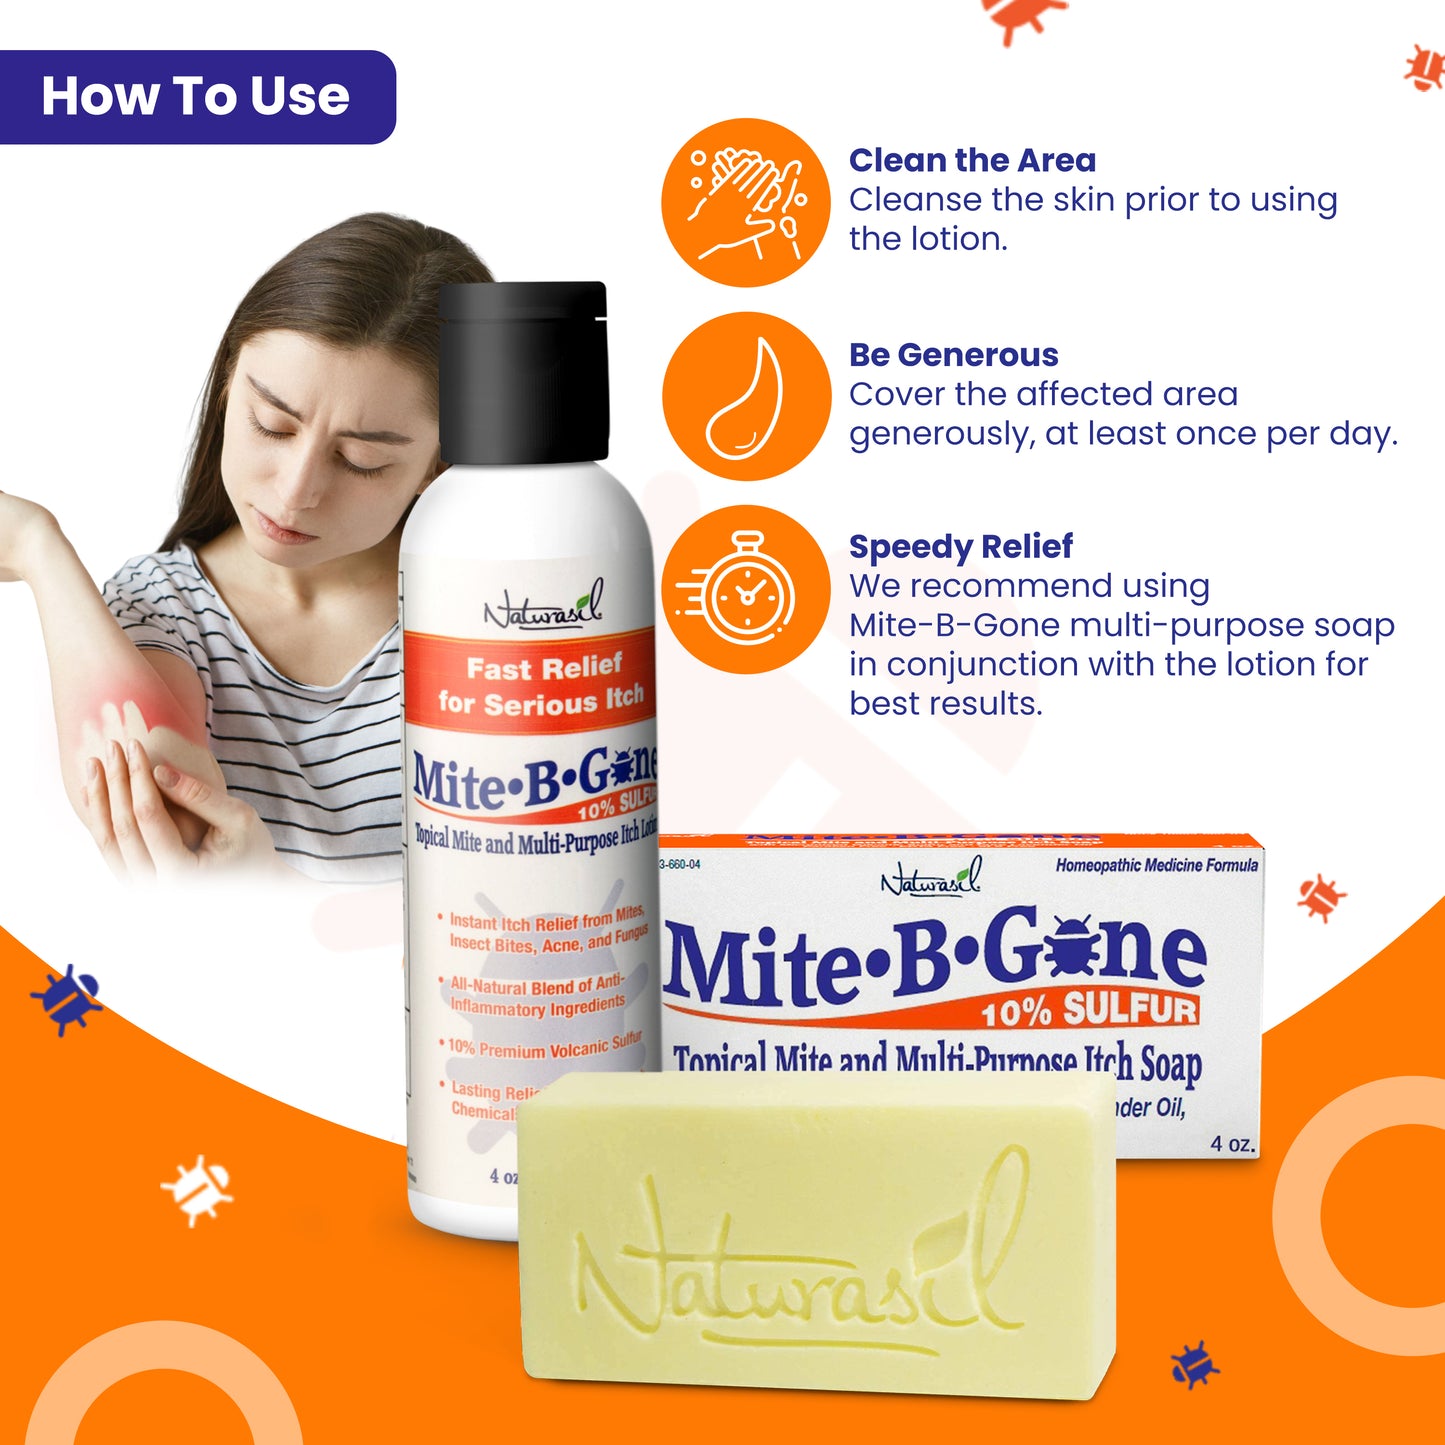 Mite-B-Gone 10% Sulfur Lotion (8oz) | Itch Relief from Mites, Insect Bites, Acne, and Fungus